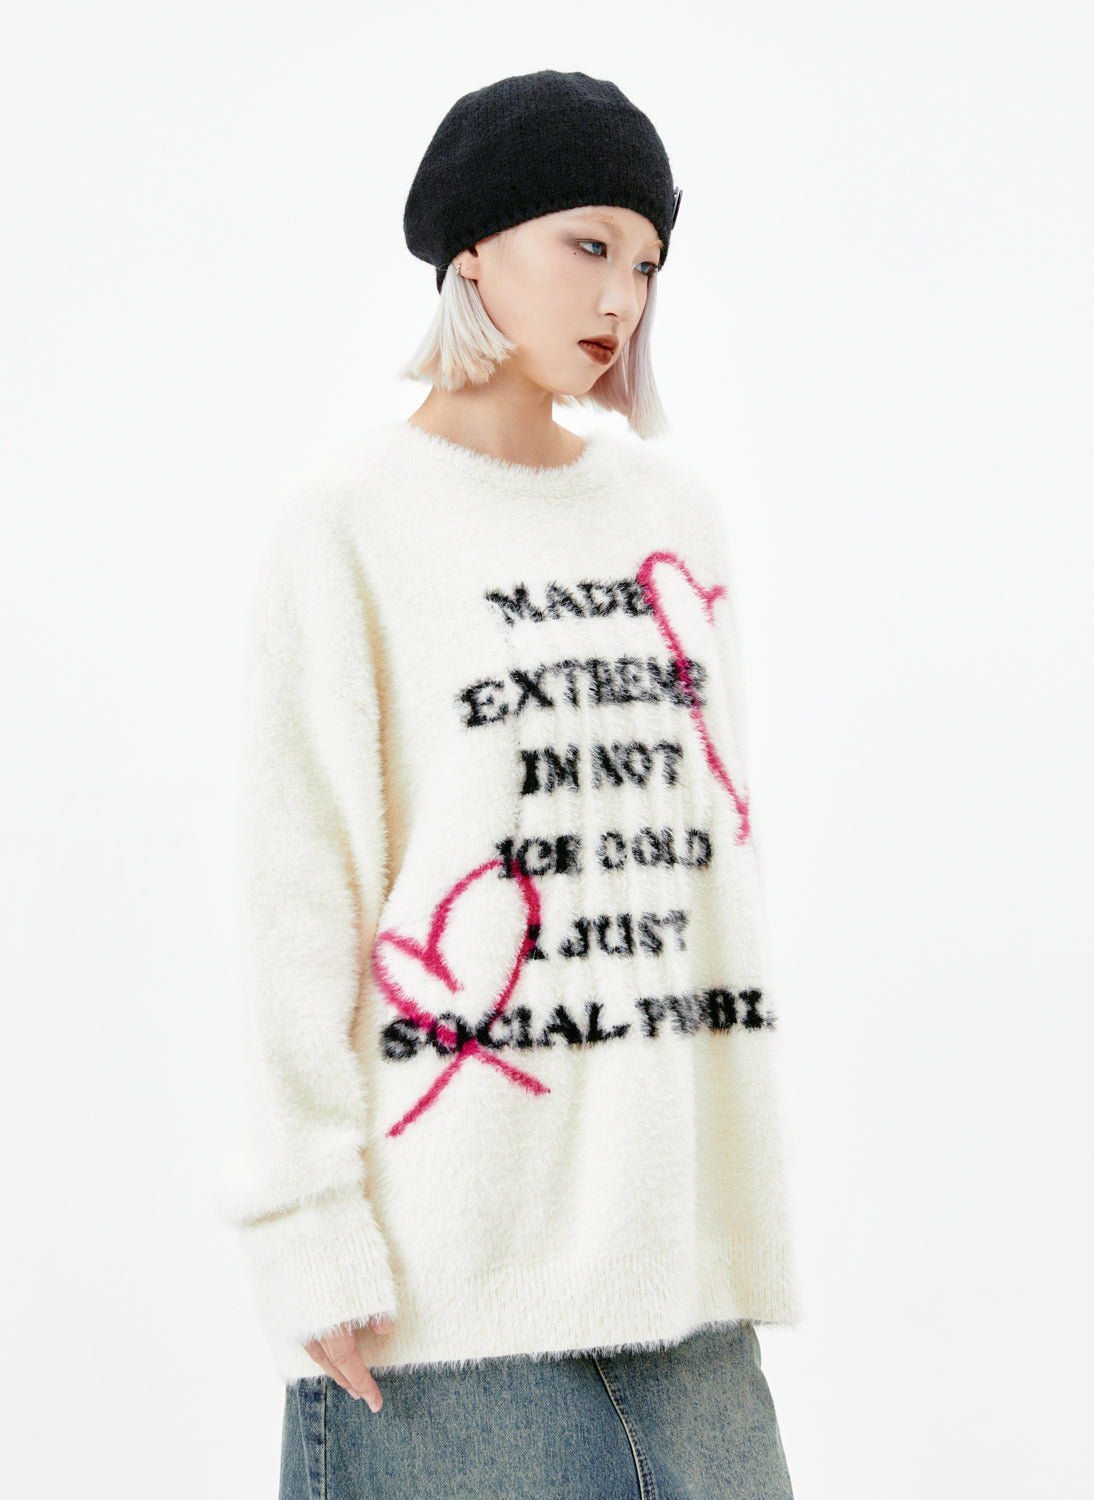 I'M NOT ICE COLD, I JUST SOCIAL PHOBIA KNITWEAR